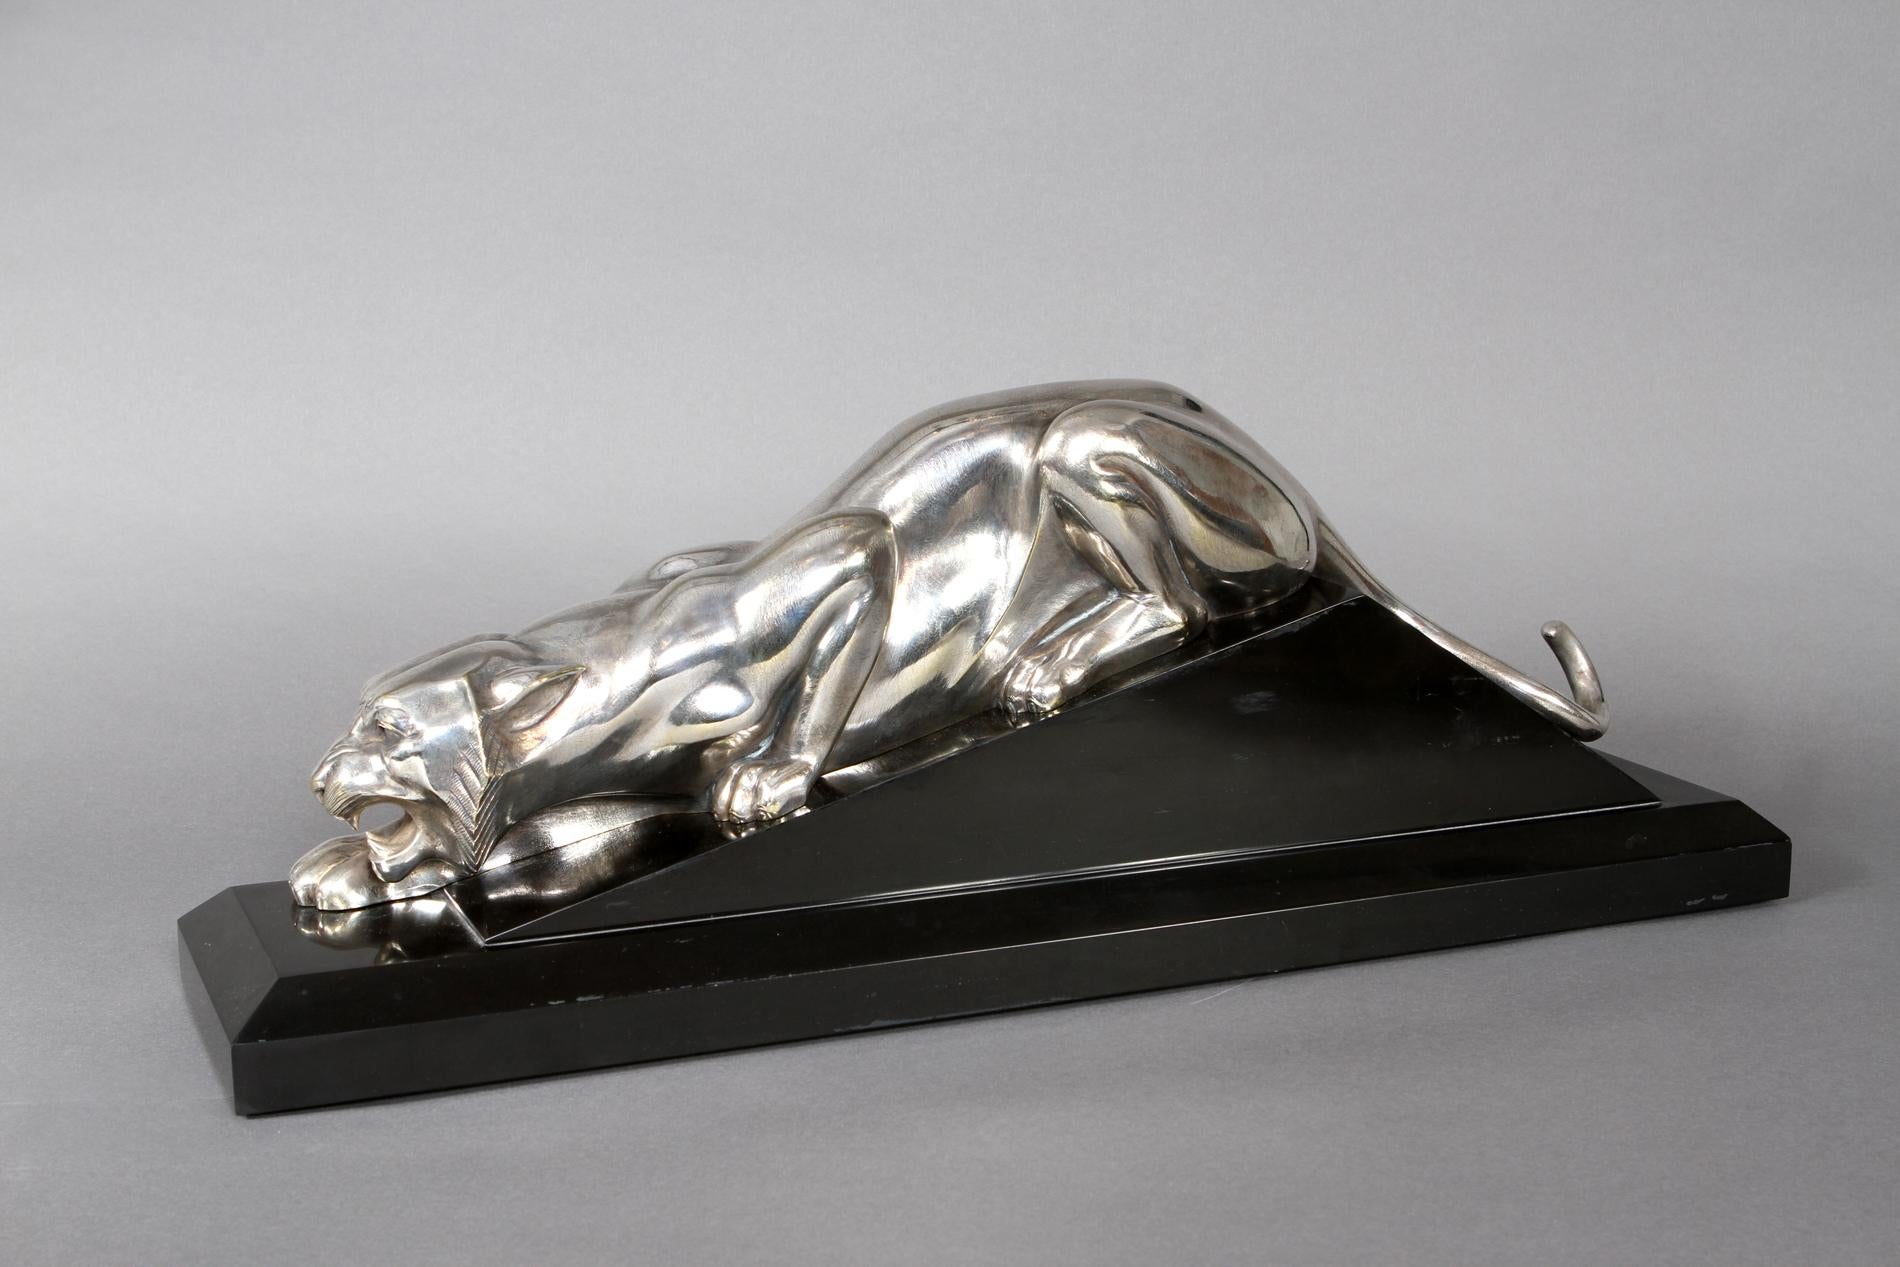 Silvered bronze sculpture representing a tiger by Georges Lavroff standing on a black marble base. 
The sculpture is part of the book 